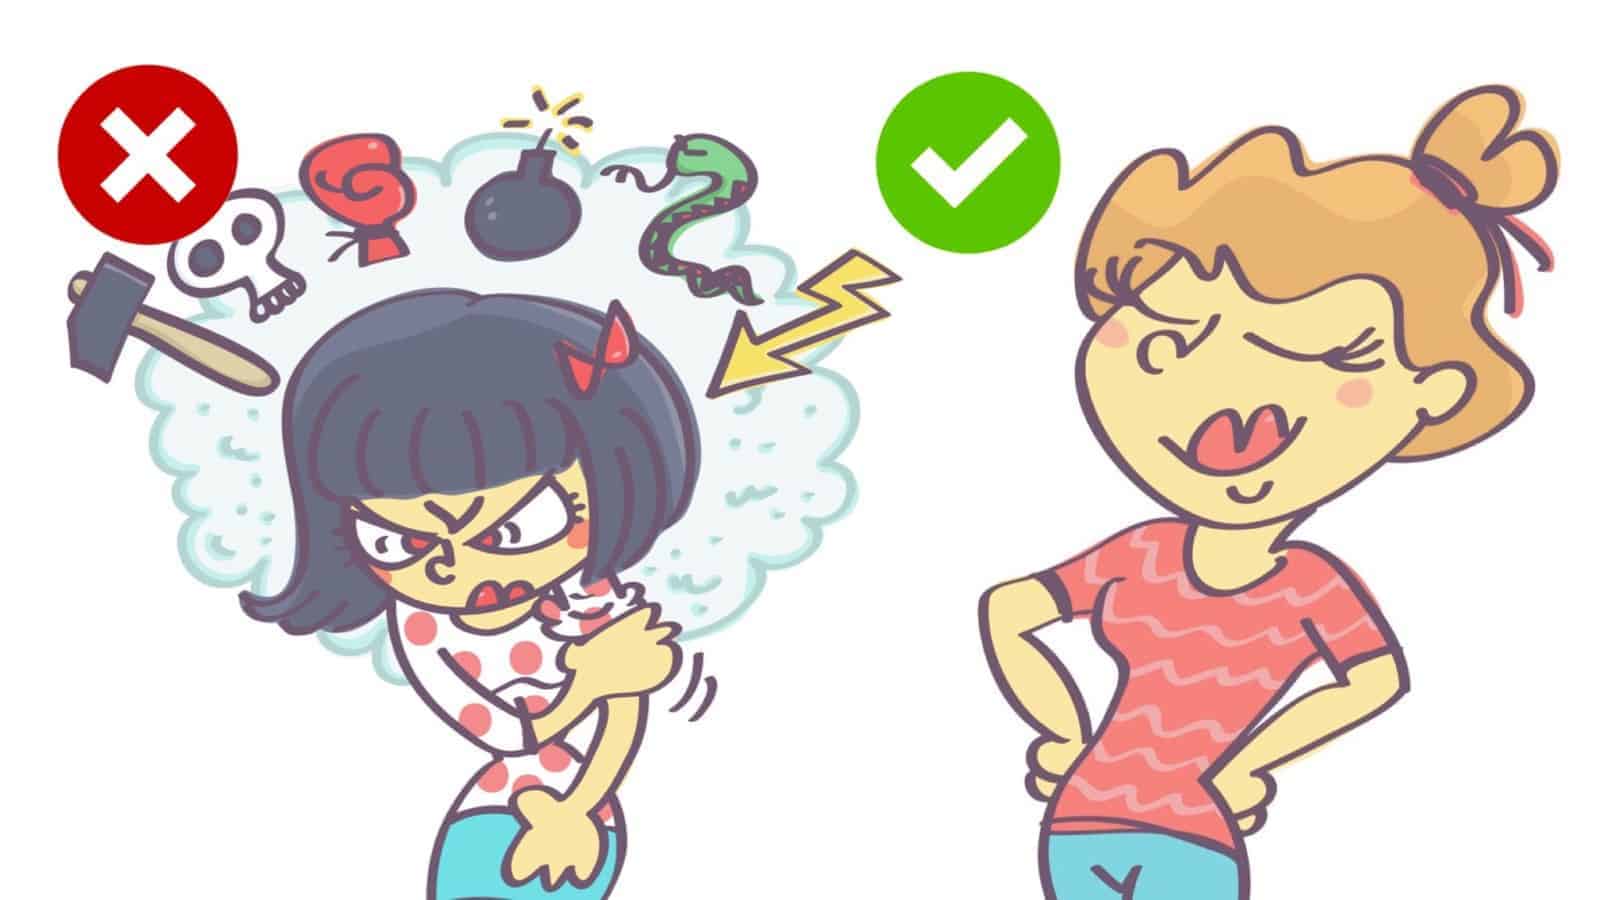 5 Responses To Use When Someone Is Having A Temper Tantrum